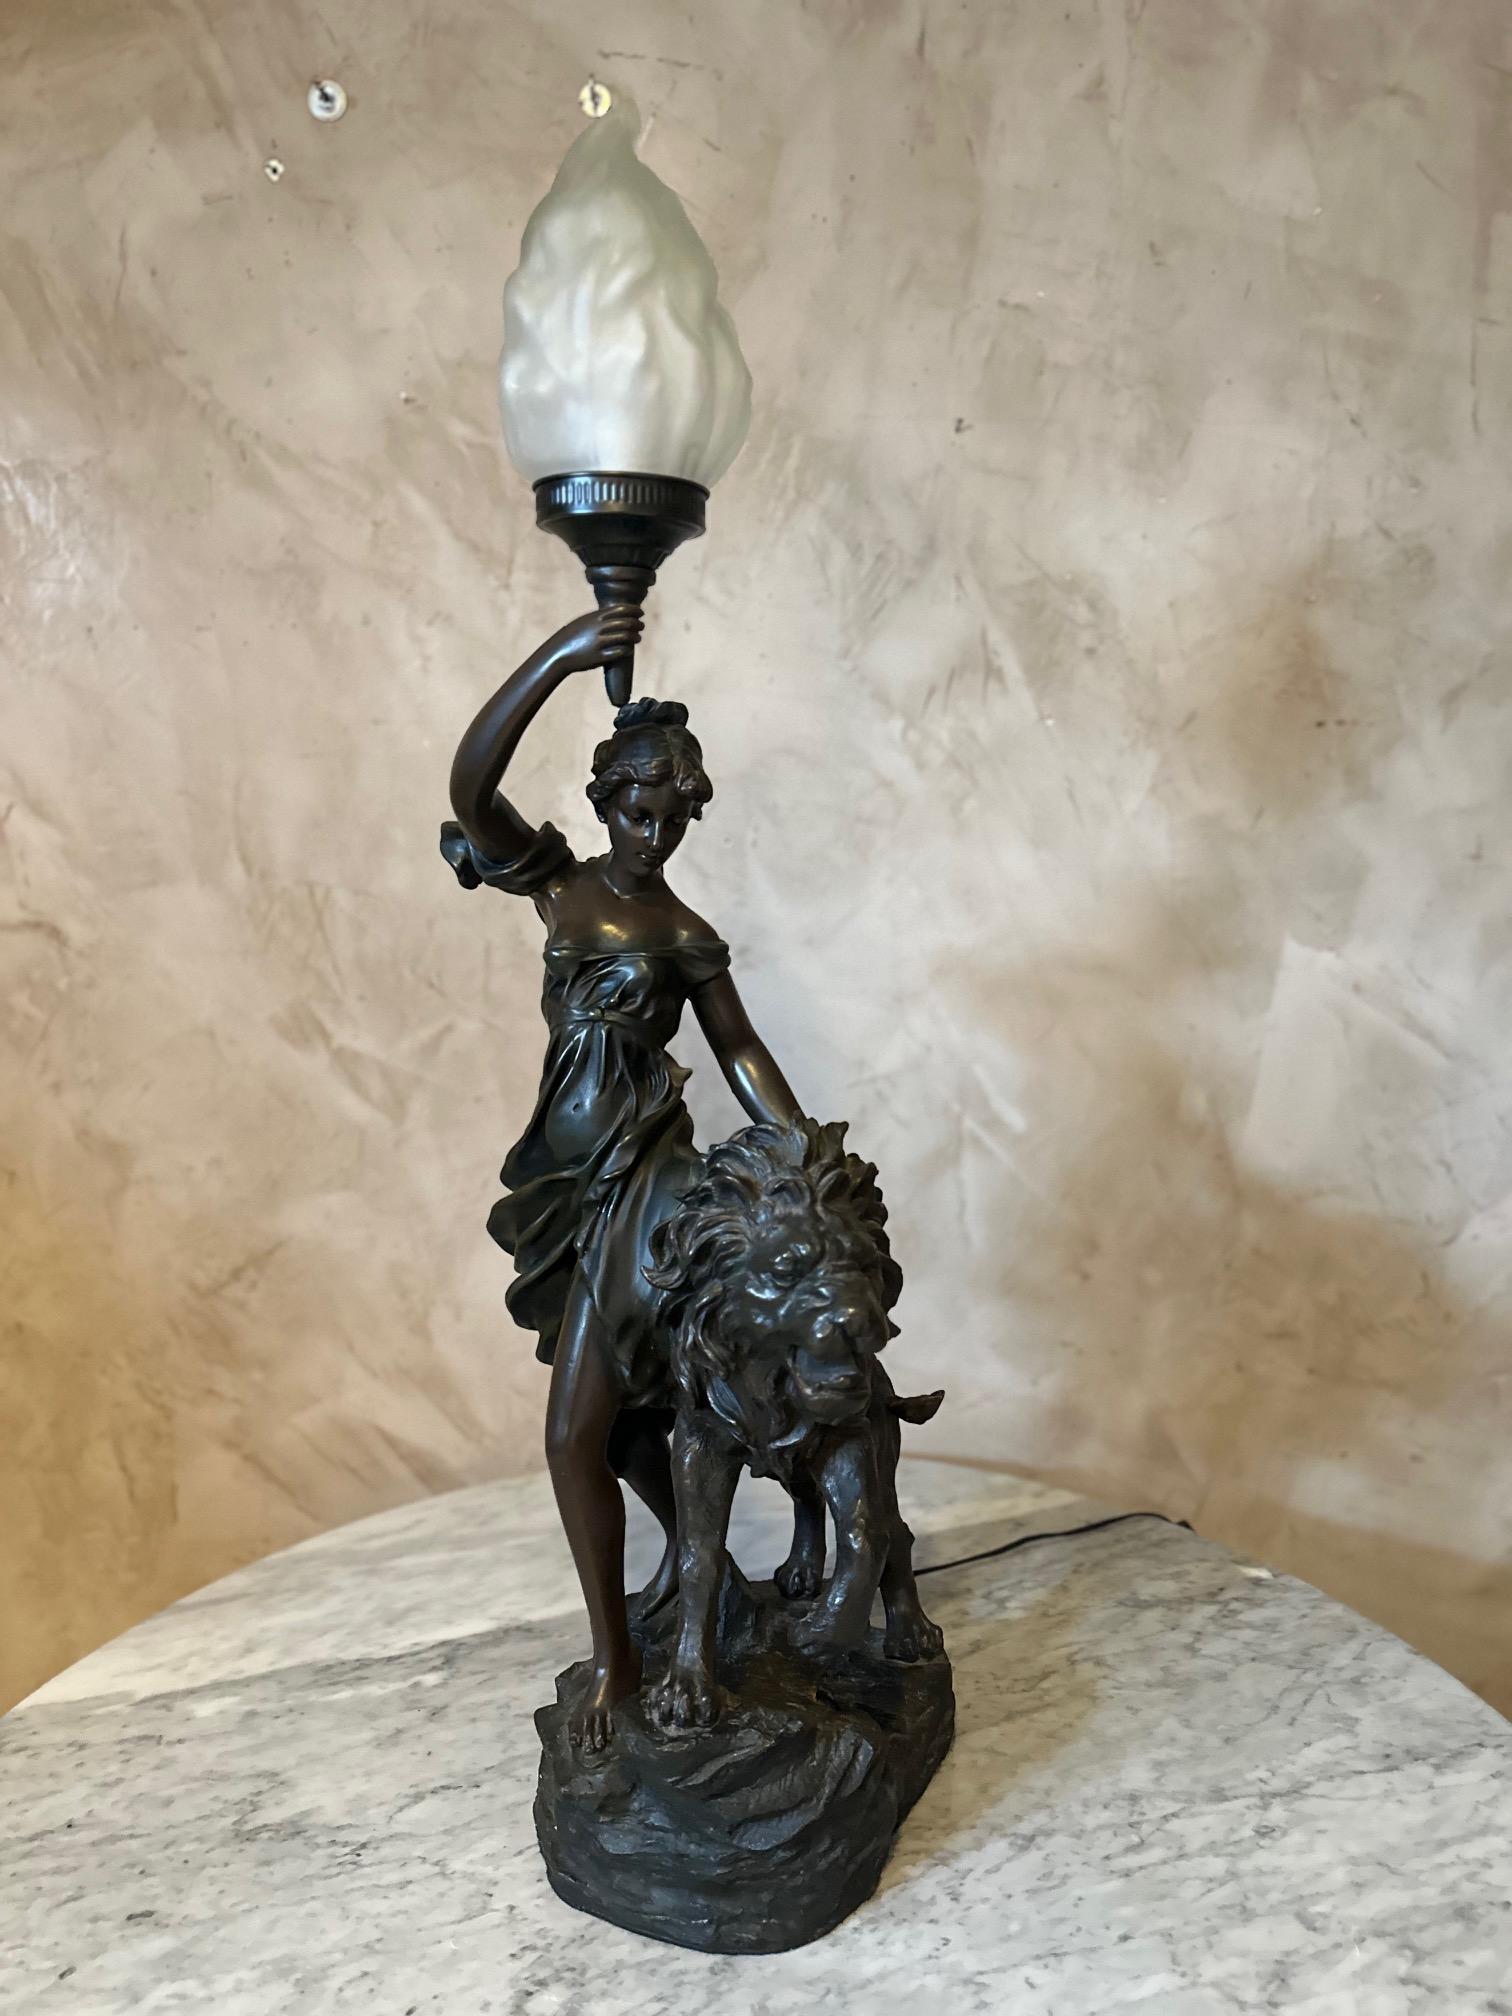 Very beautiful statue made in spelter representing a woman carrying a torch (which lights up) accompanied by a lion. The torch is made with opaline glass. Large size. Nice quality. 
The lion's tail has been broken but overall good condition.